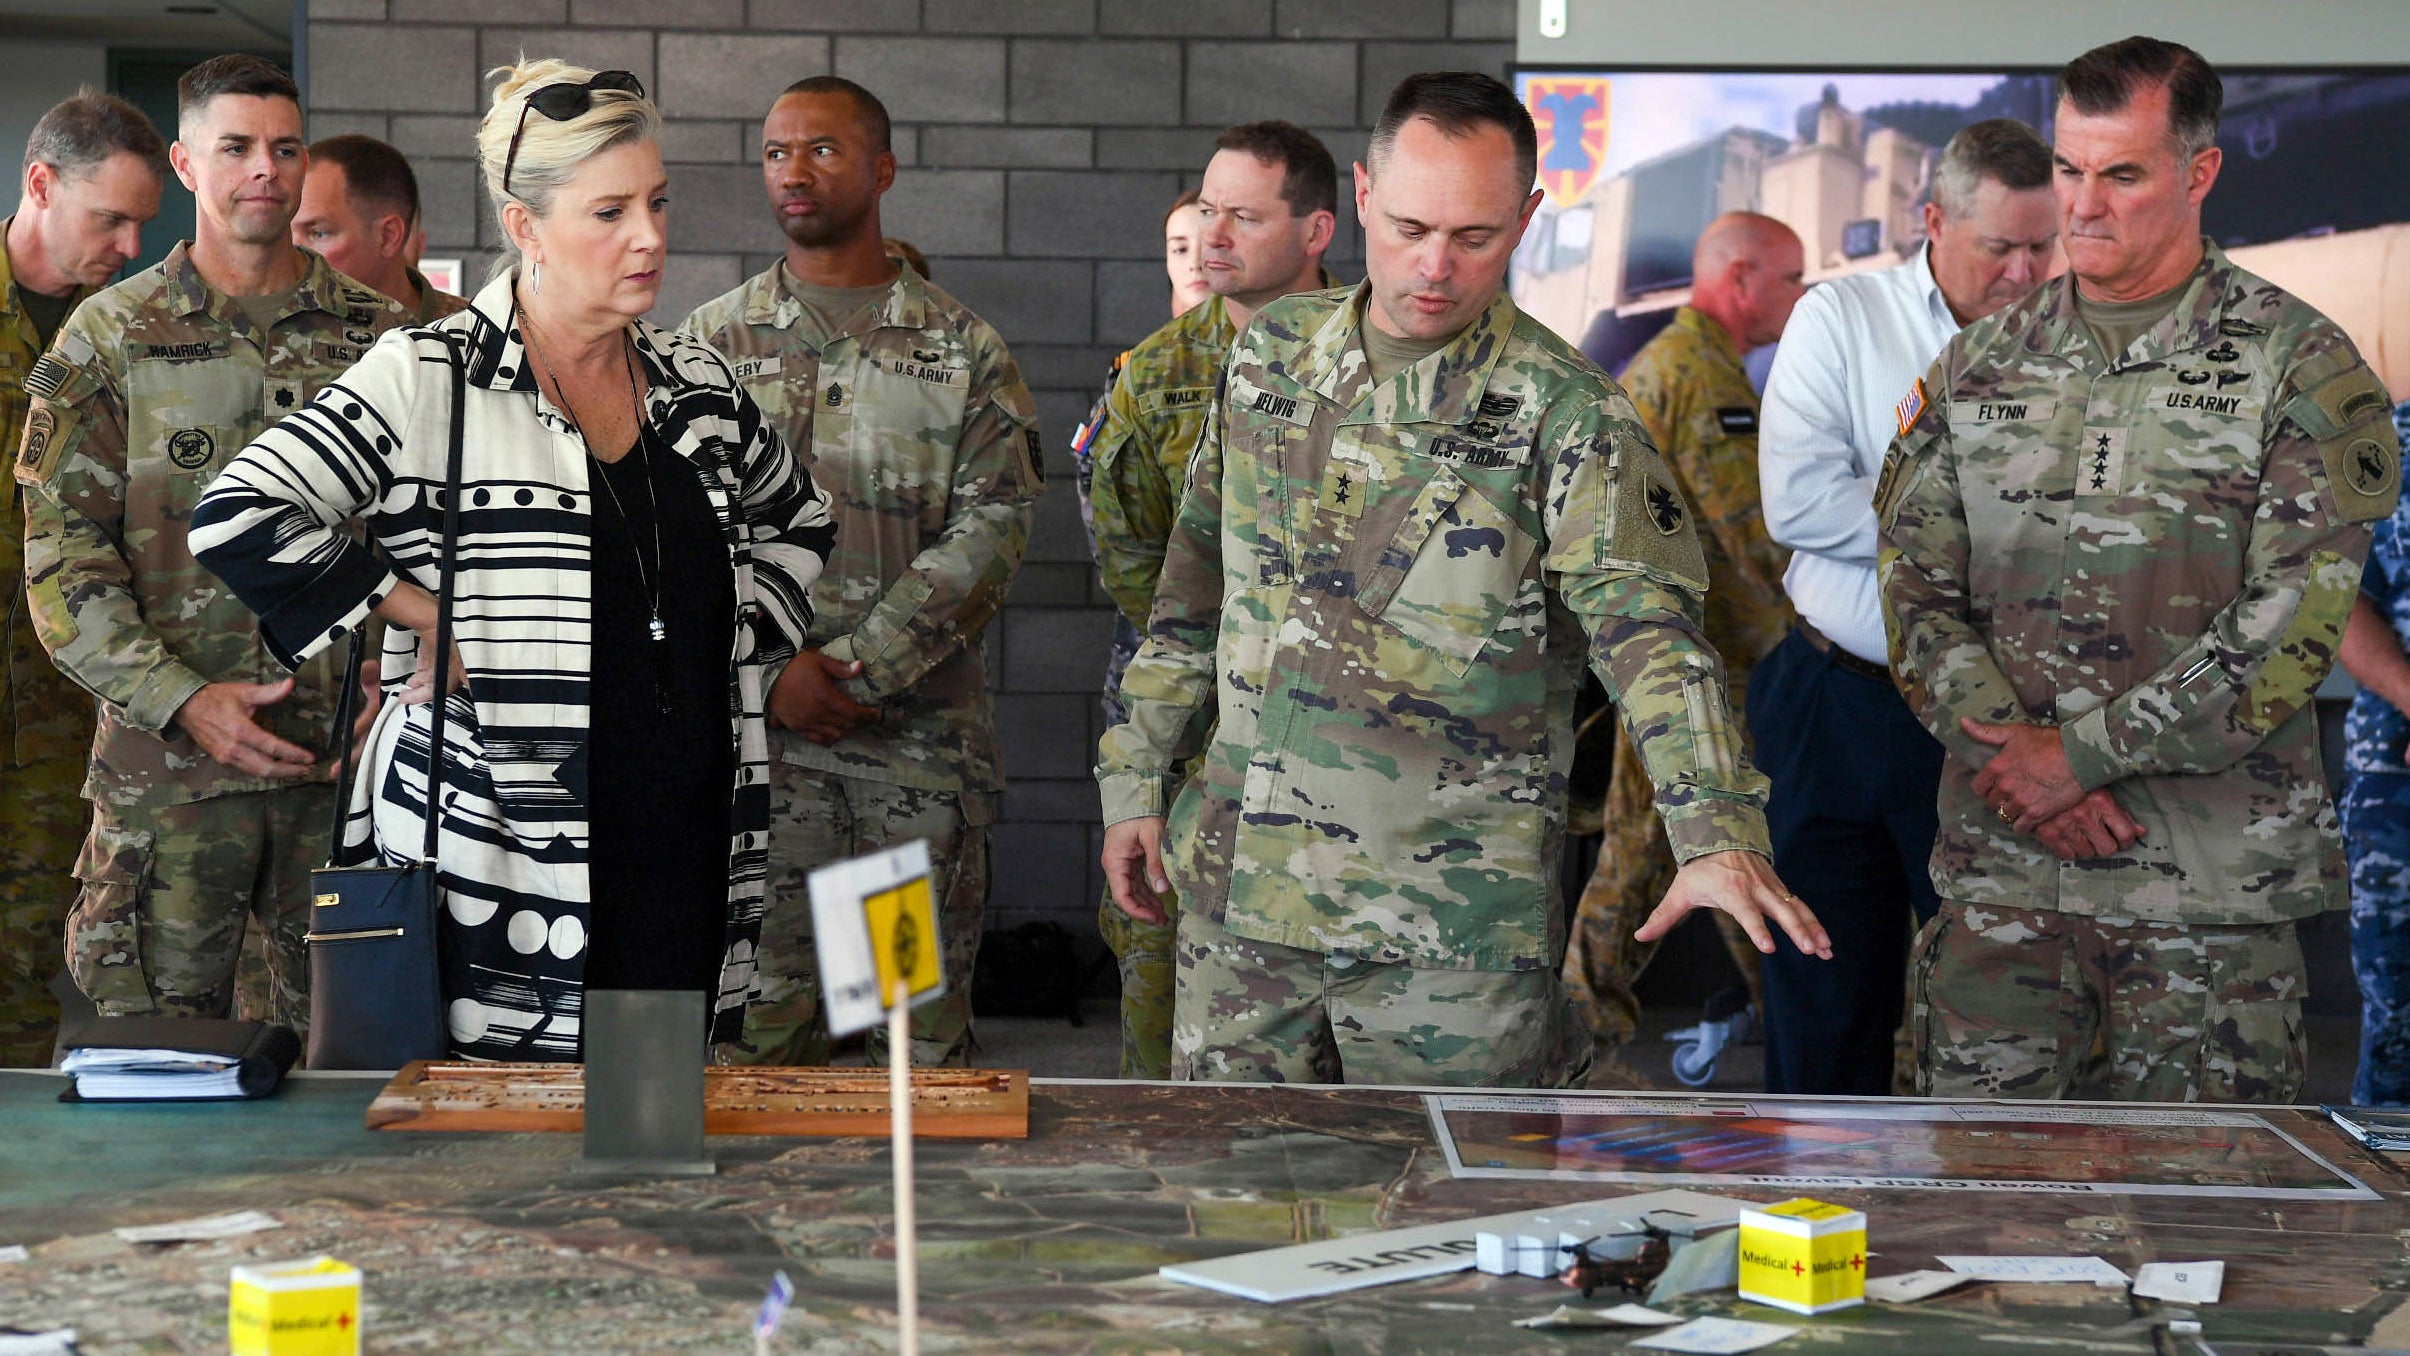 Secretary of the Army Wormuth speaks with soldiers